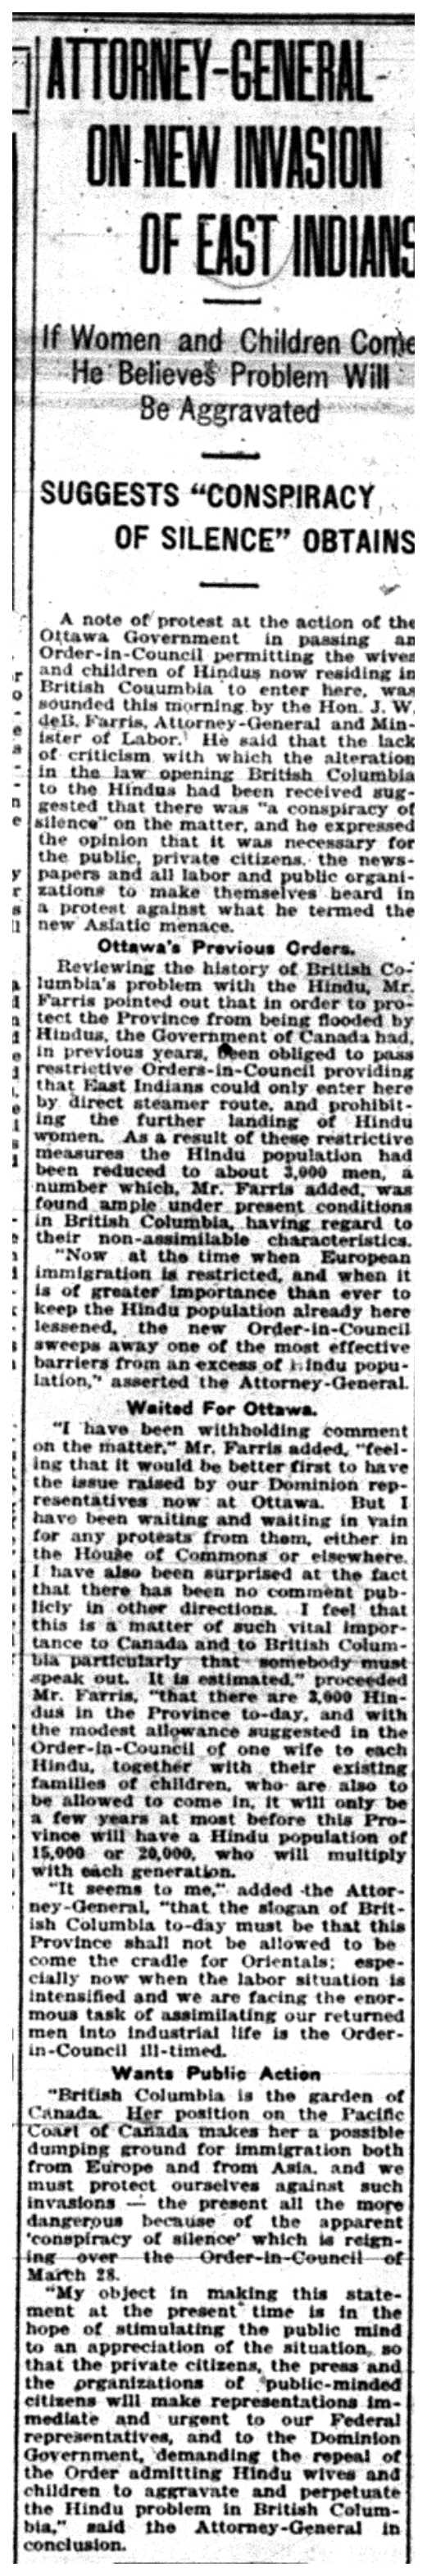 "Attorney-General On New Invasion of East Indians"